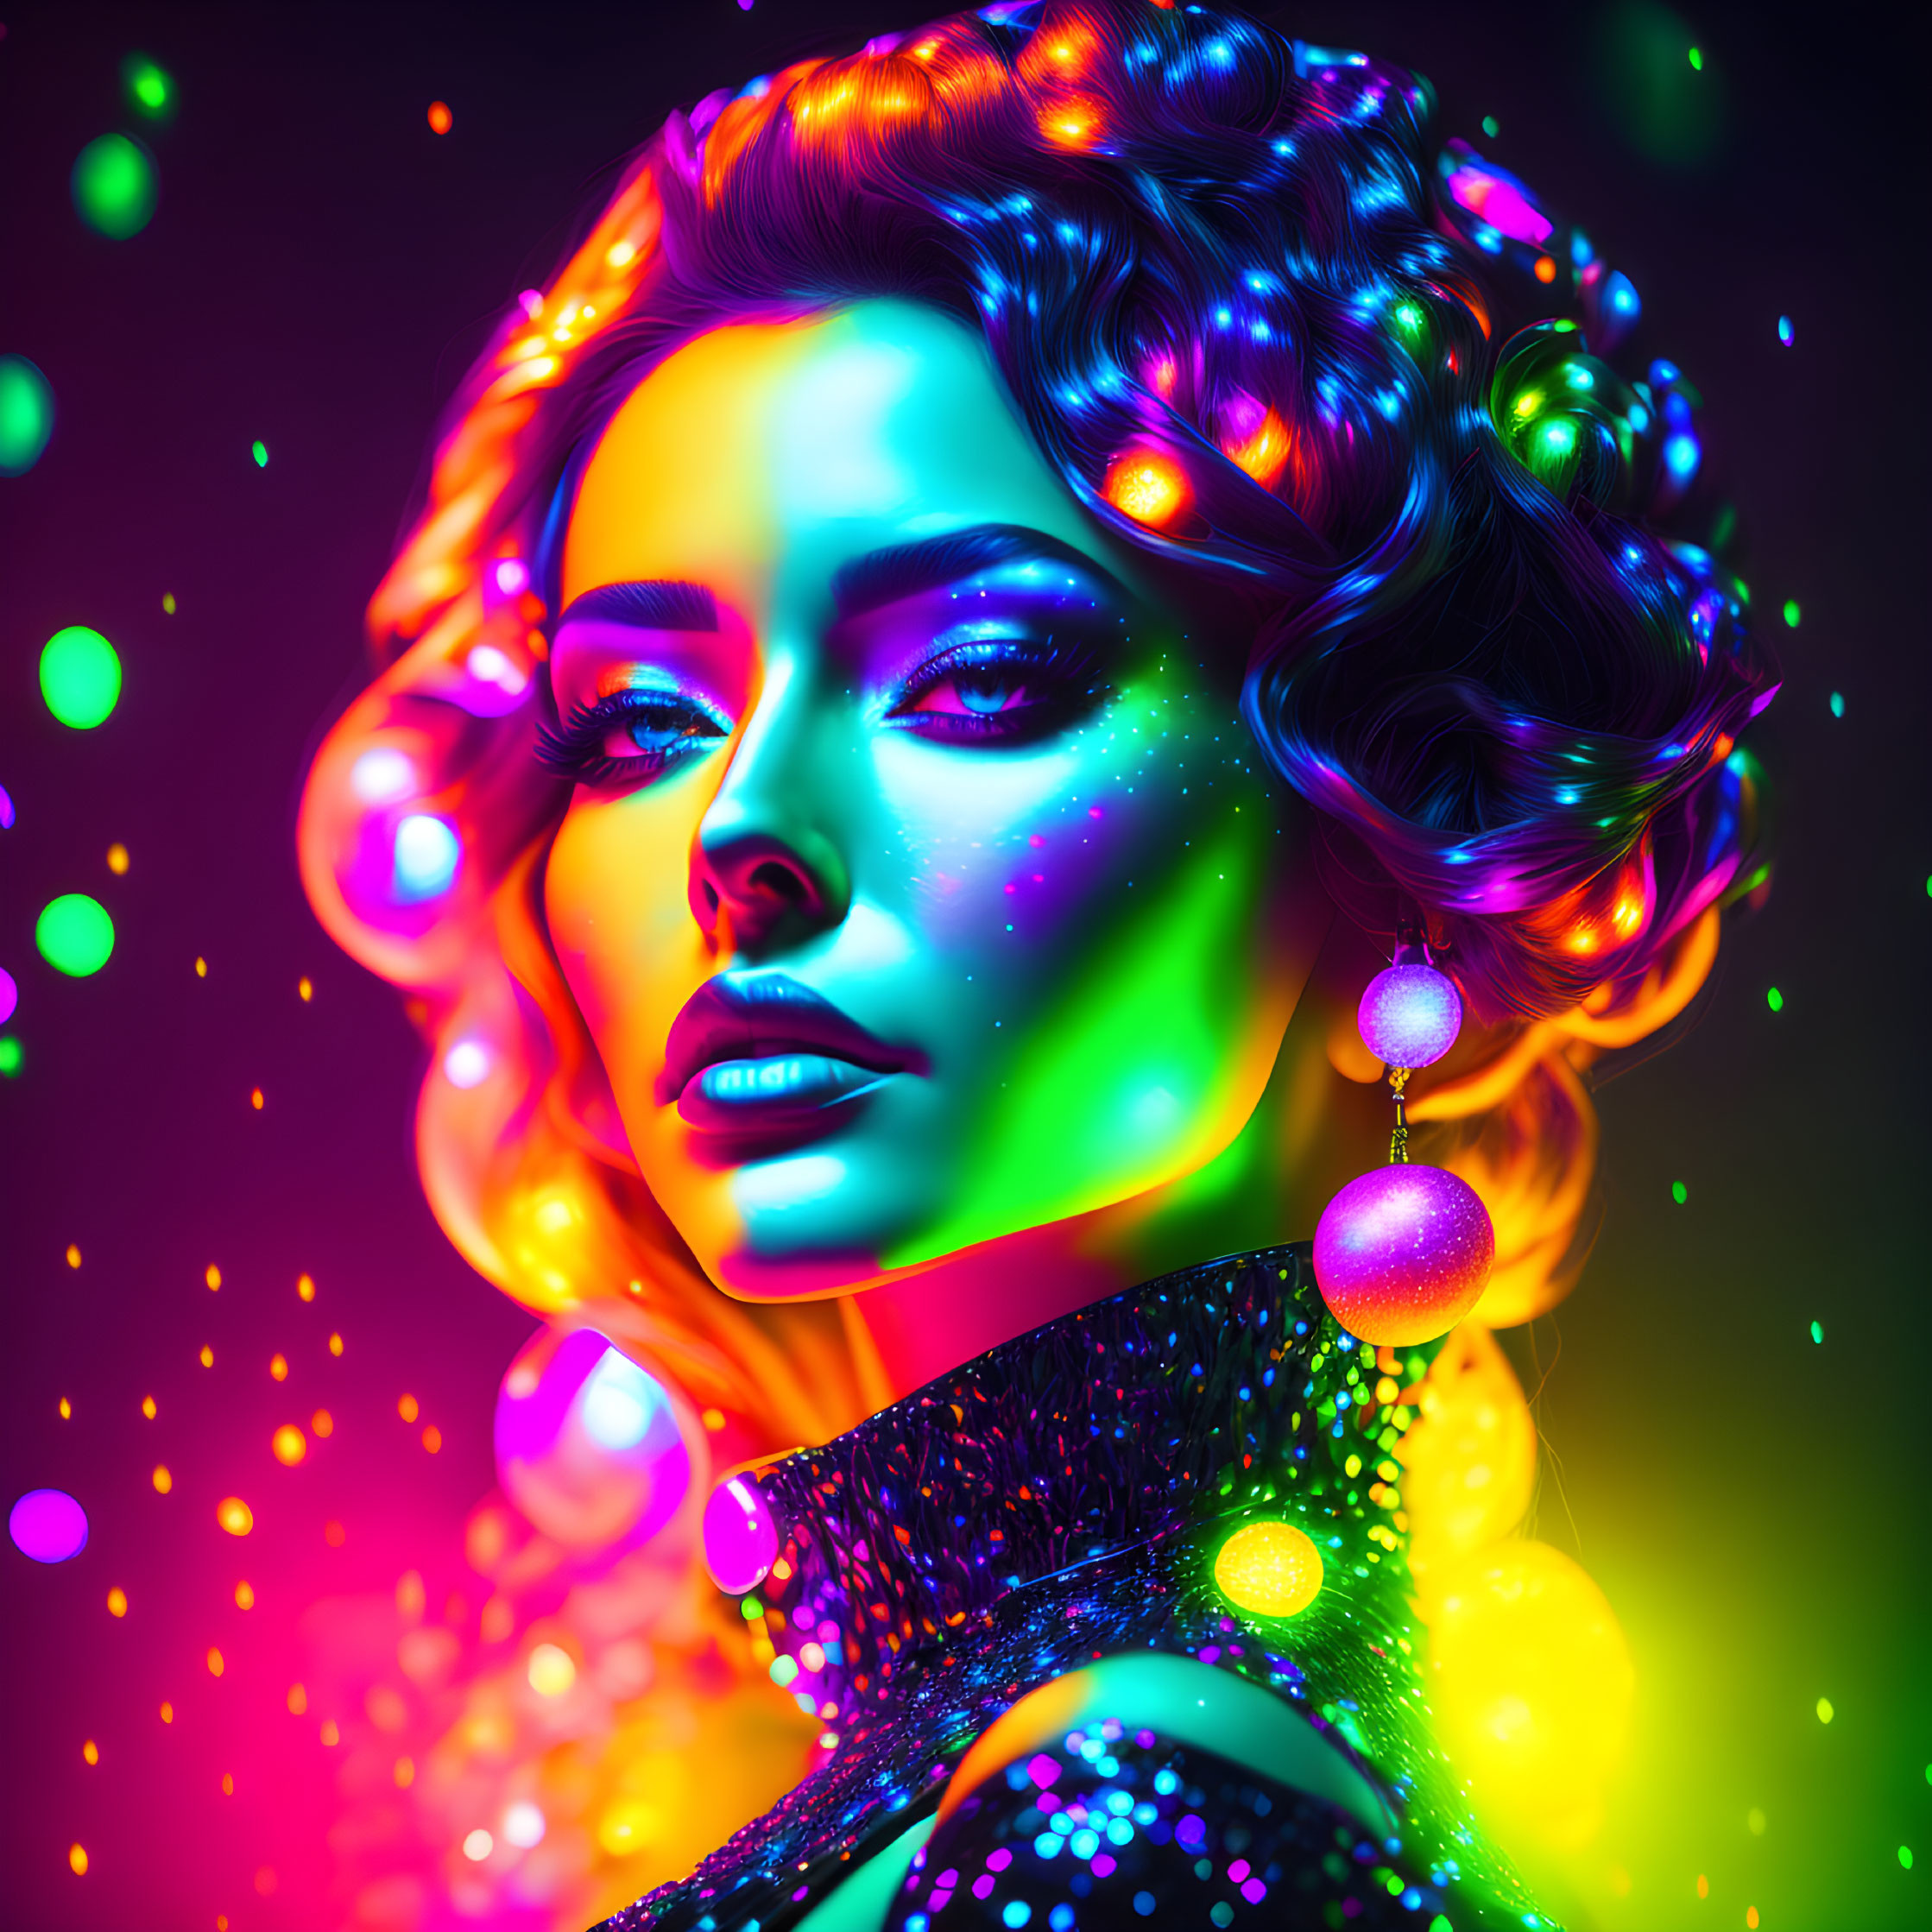 Colorful digital art: Woman with neon skin, festive baubles, and bokeh background